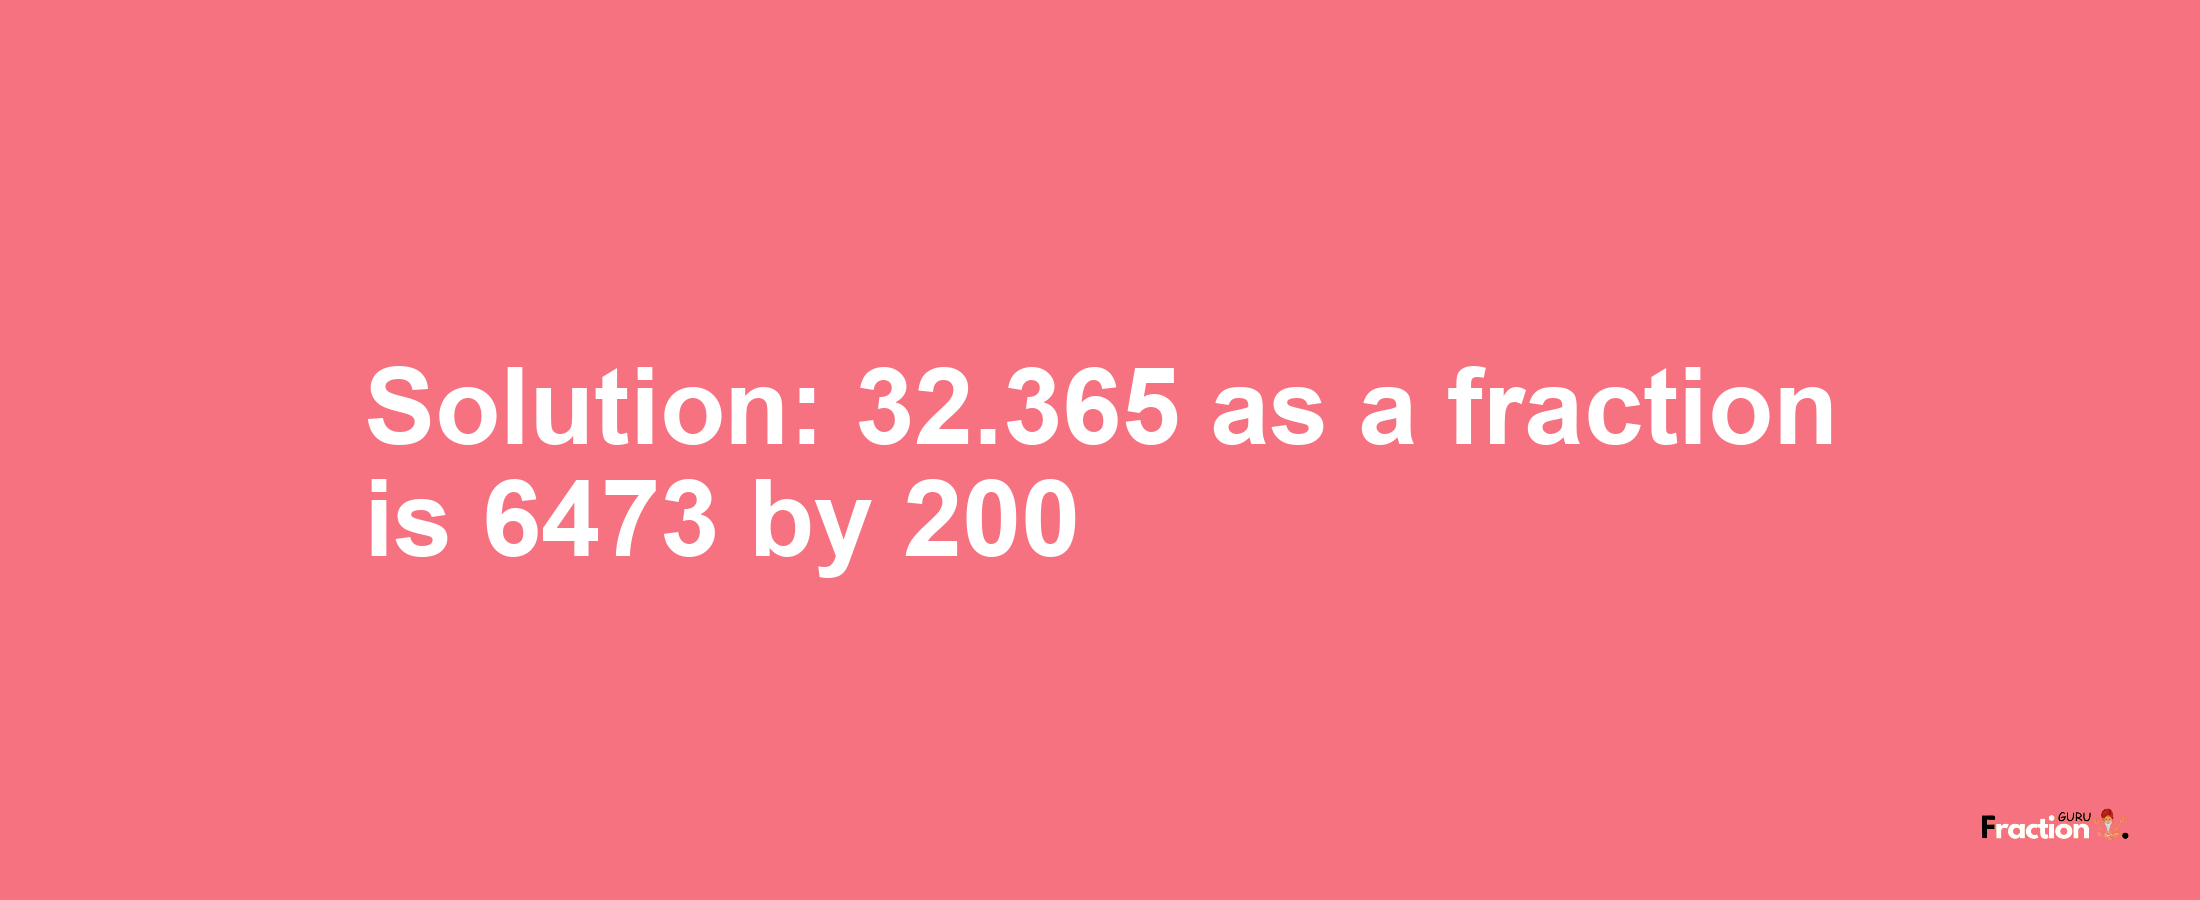 Solution:32.365 as a fraction is 6473/200